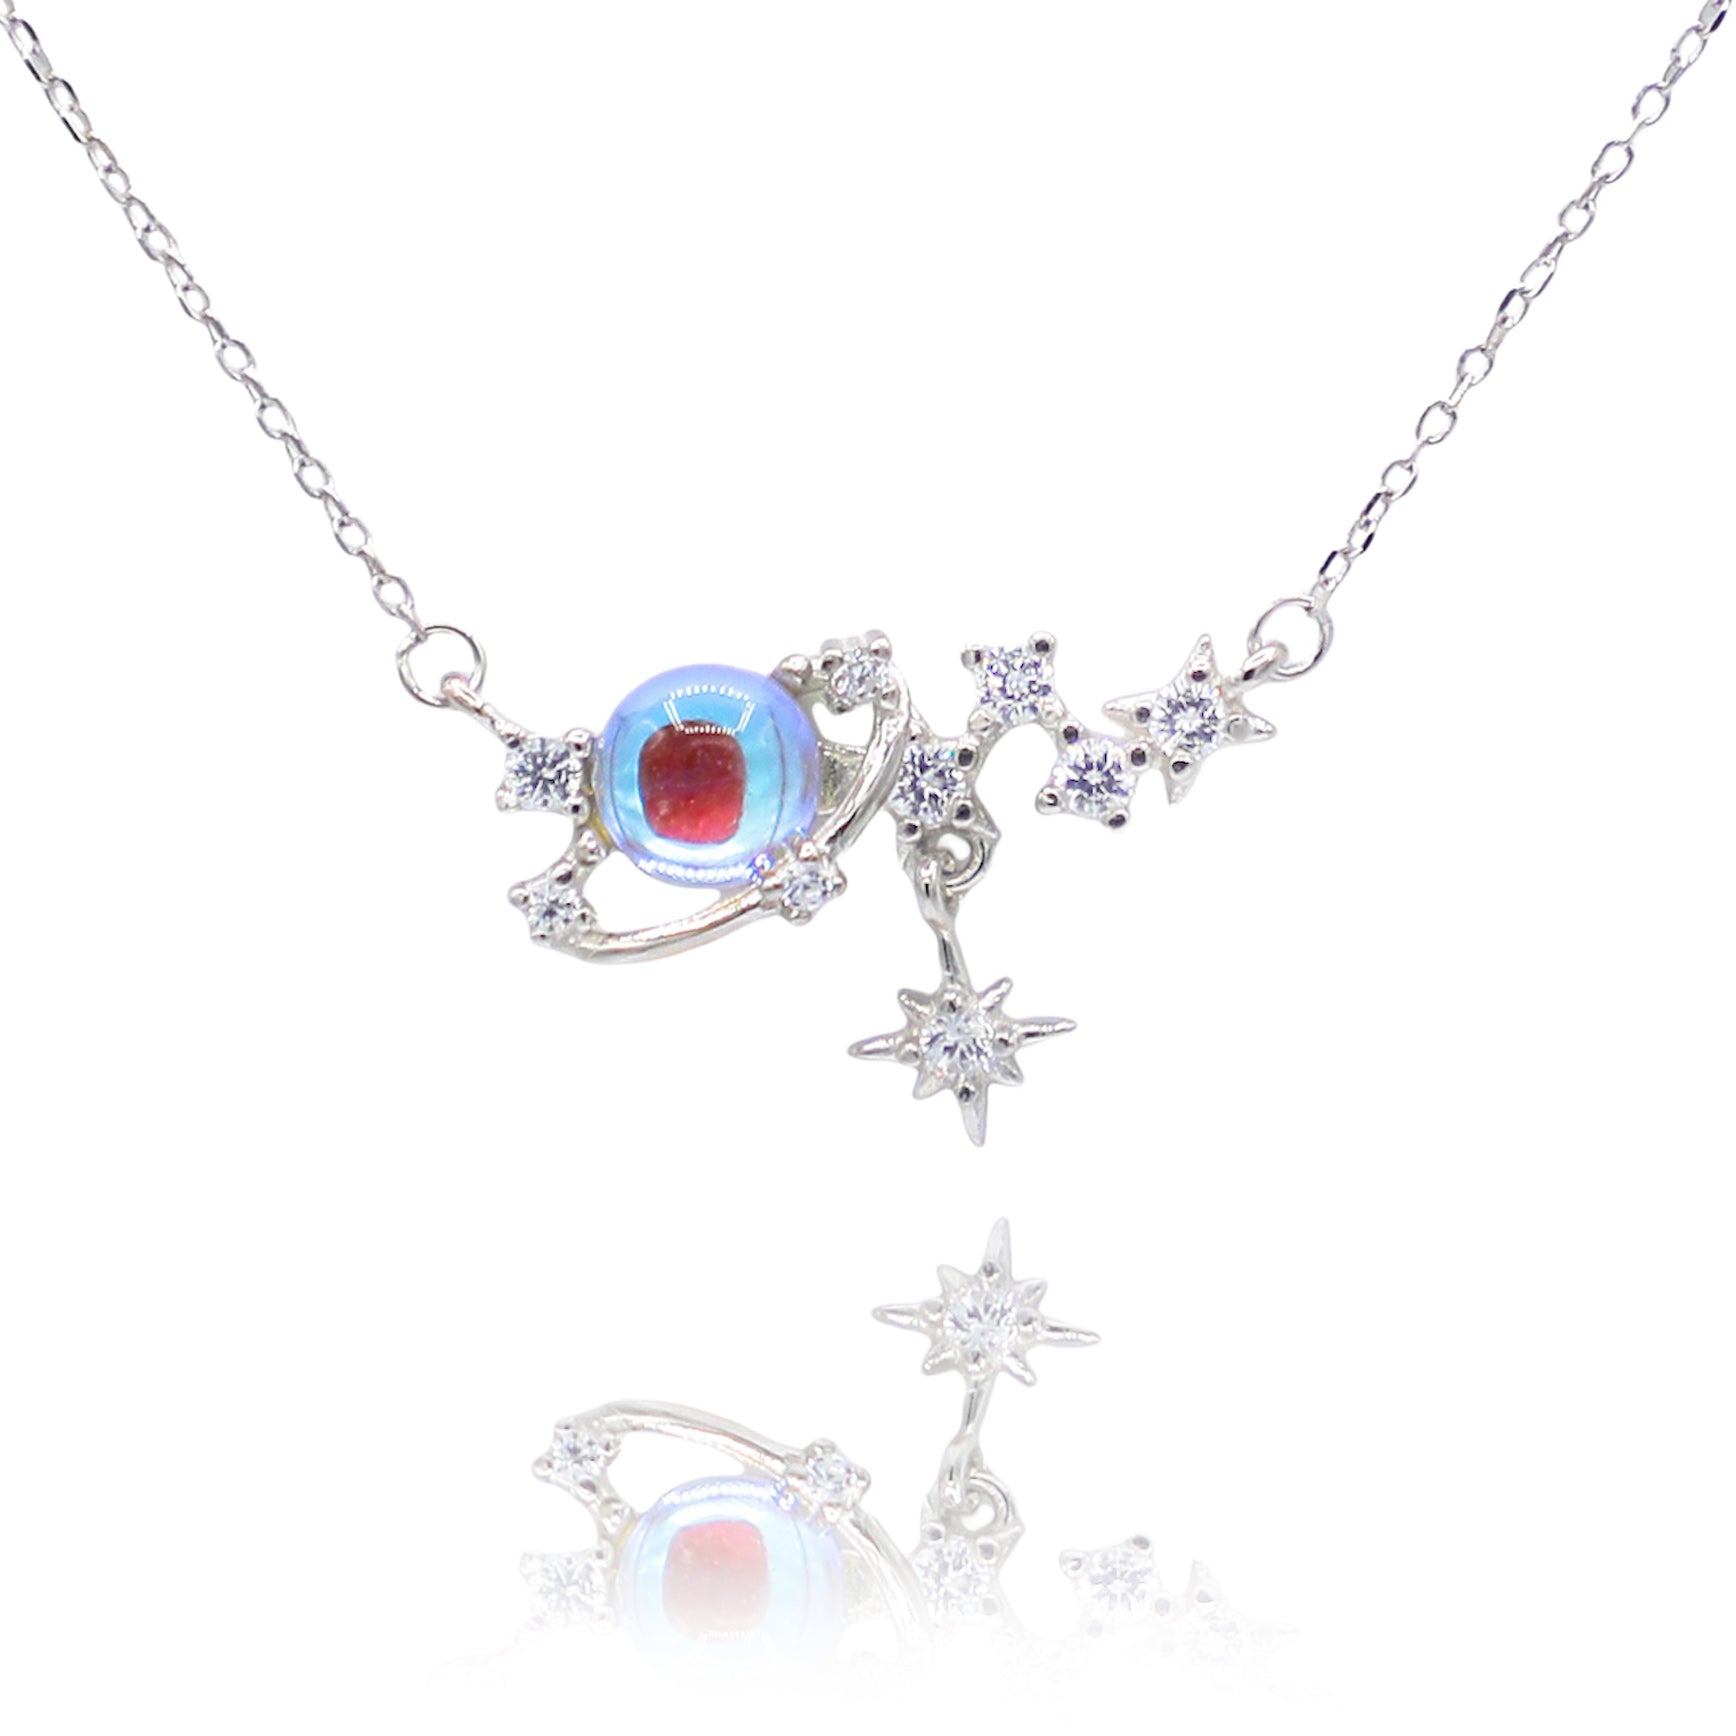 Magical Galaxy Necklace